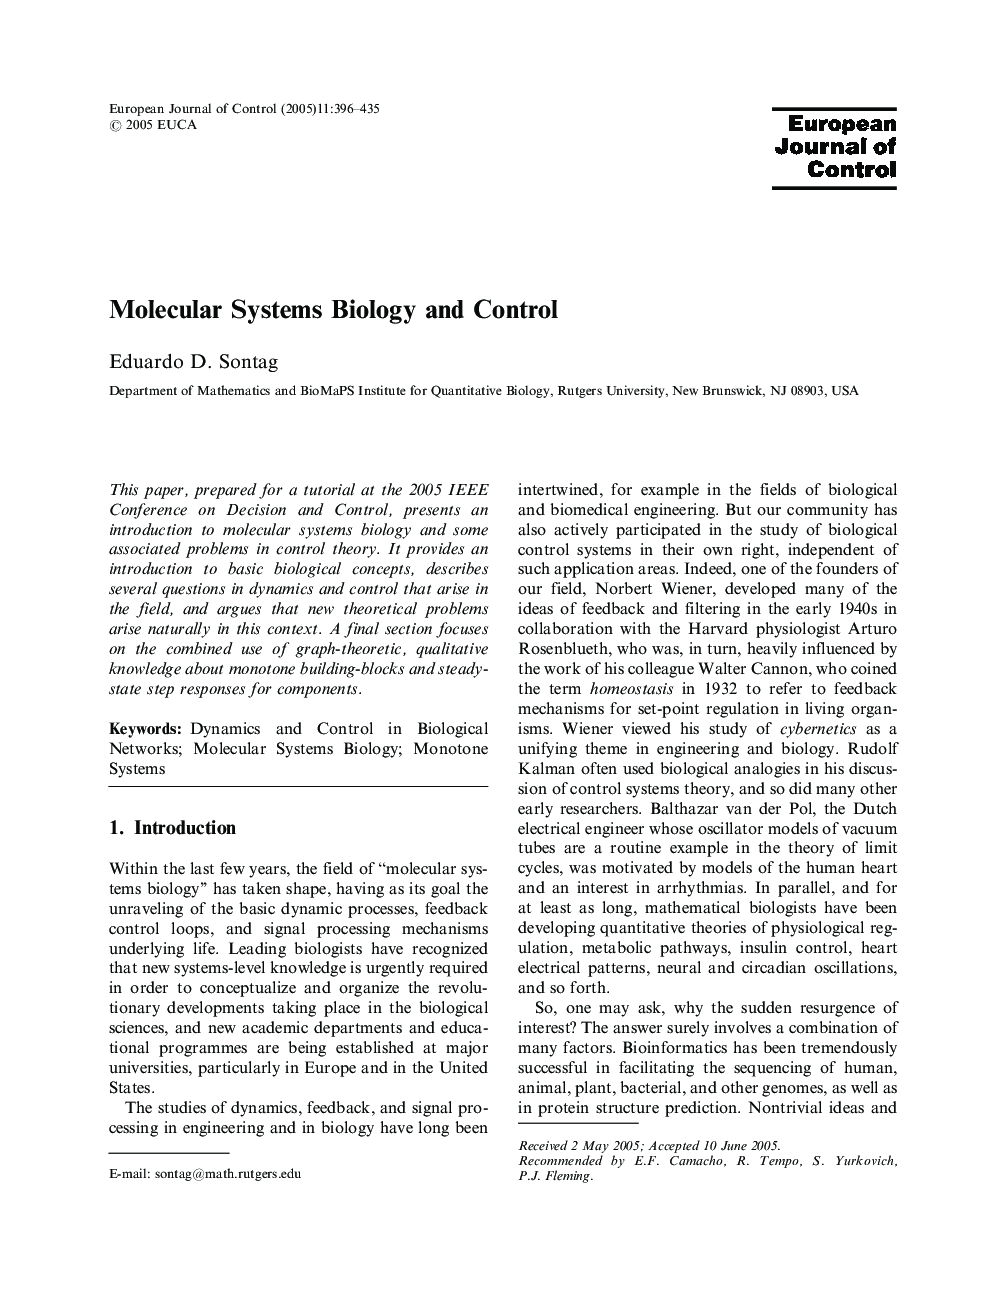 Molecular Systems Biology and Control